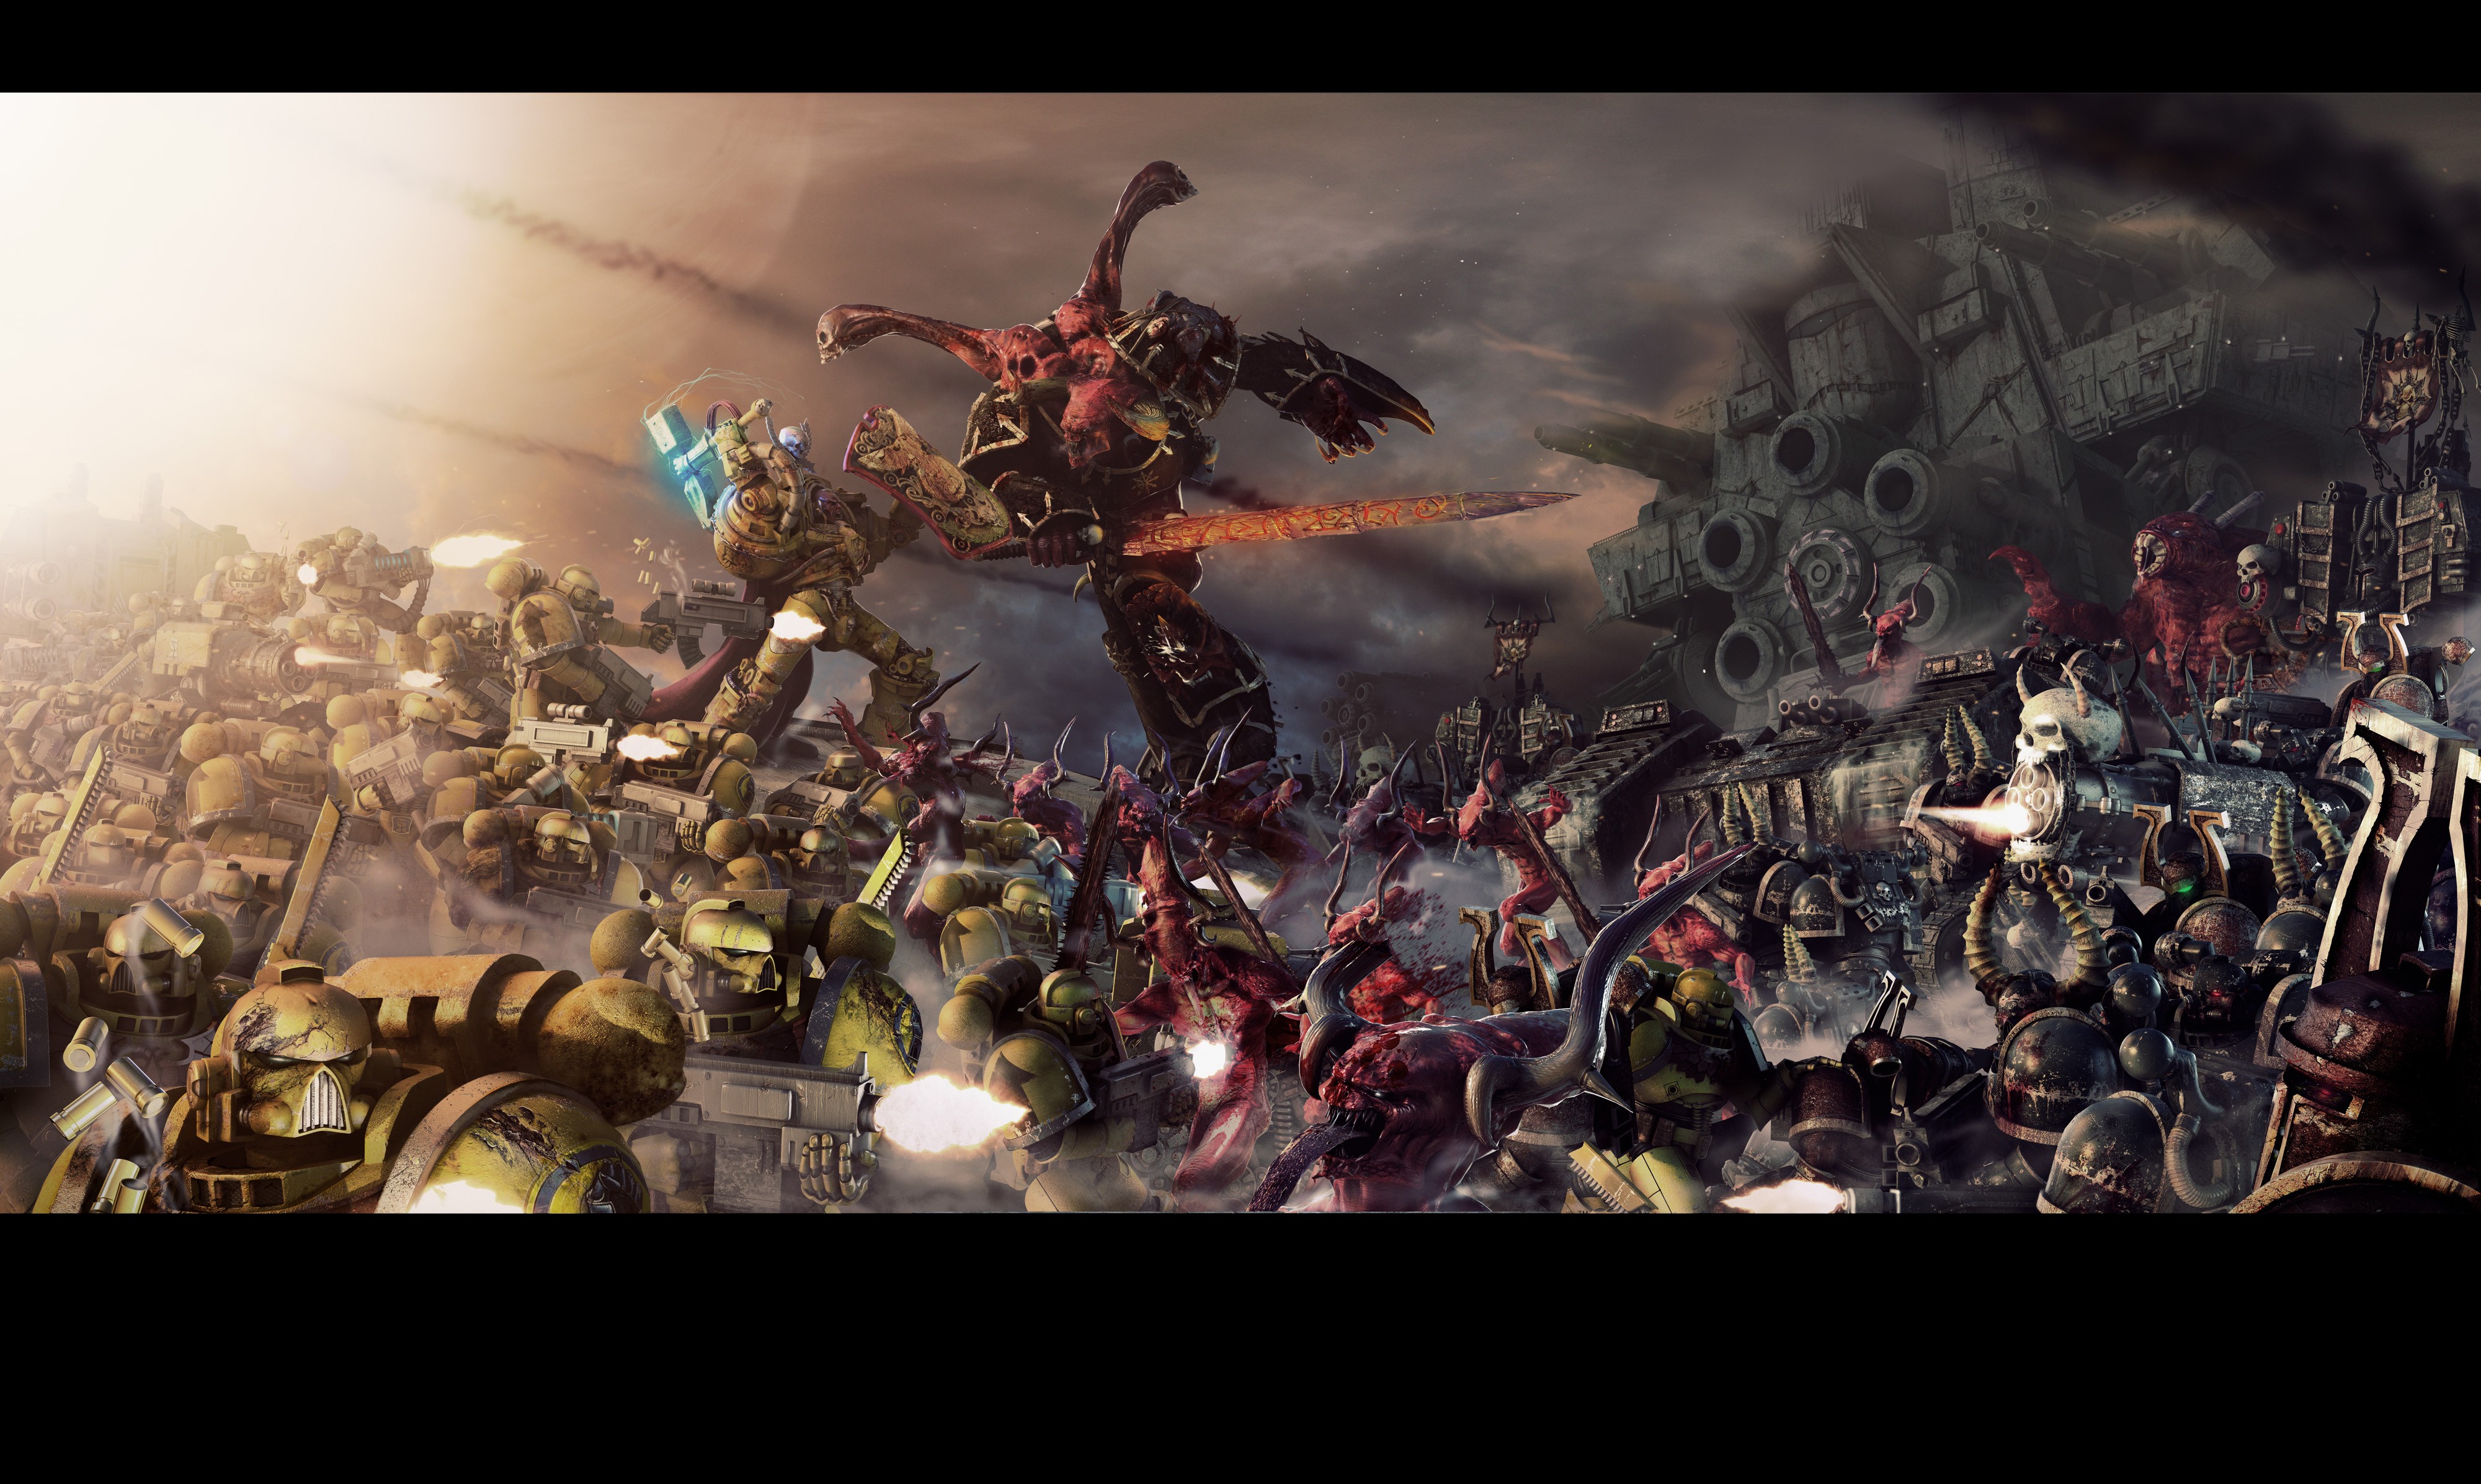 wh40k wallpaper,action adventure game,strategy video game,pc game,battle,cg artwork